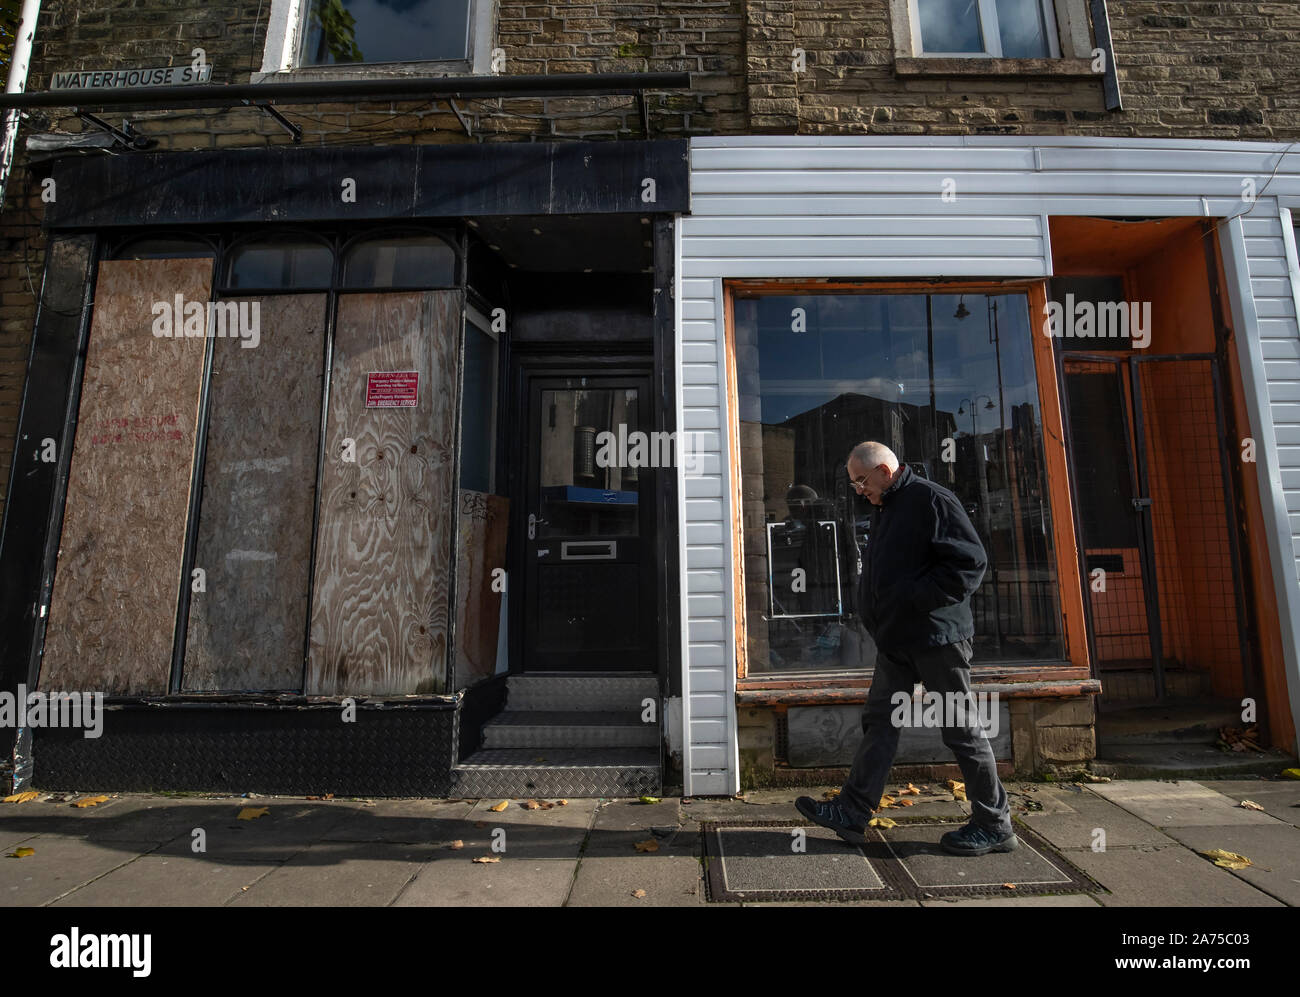 A man walks past a closed shop in Halifax in Yorkshire, as a think tank says the Conservatives will have to target traditional Labour voters from regional towns in order to win the general election. PA Photo. Picture date: Wednesday October 30, 2019. The Conservatives will have to target traditional Labour voters from regional towns such as Workington in order to win the Christmas general election, according to a think tank. The group urged the party to target towns including Halifax, Warrington, Wigan and Workington in order to gain these key regional seats. Photo credit should read: Danny La Stock Photo